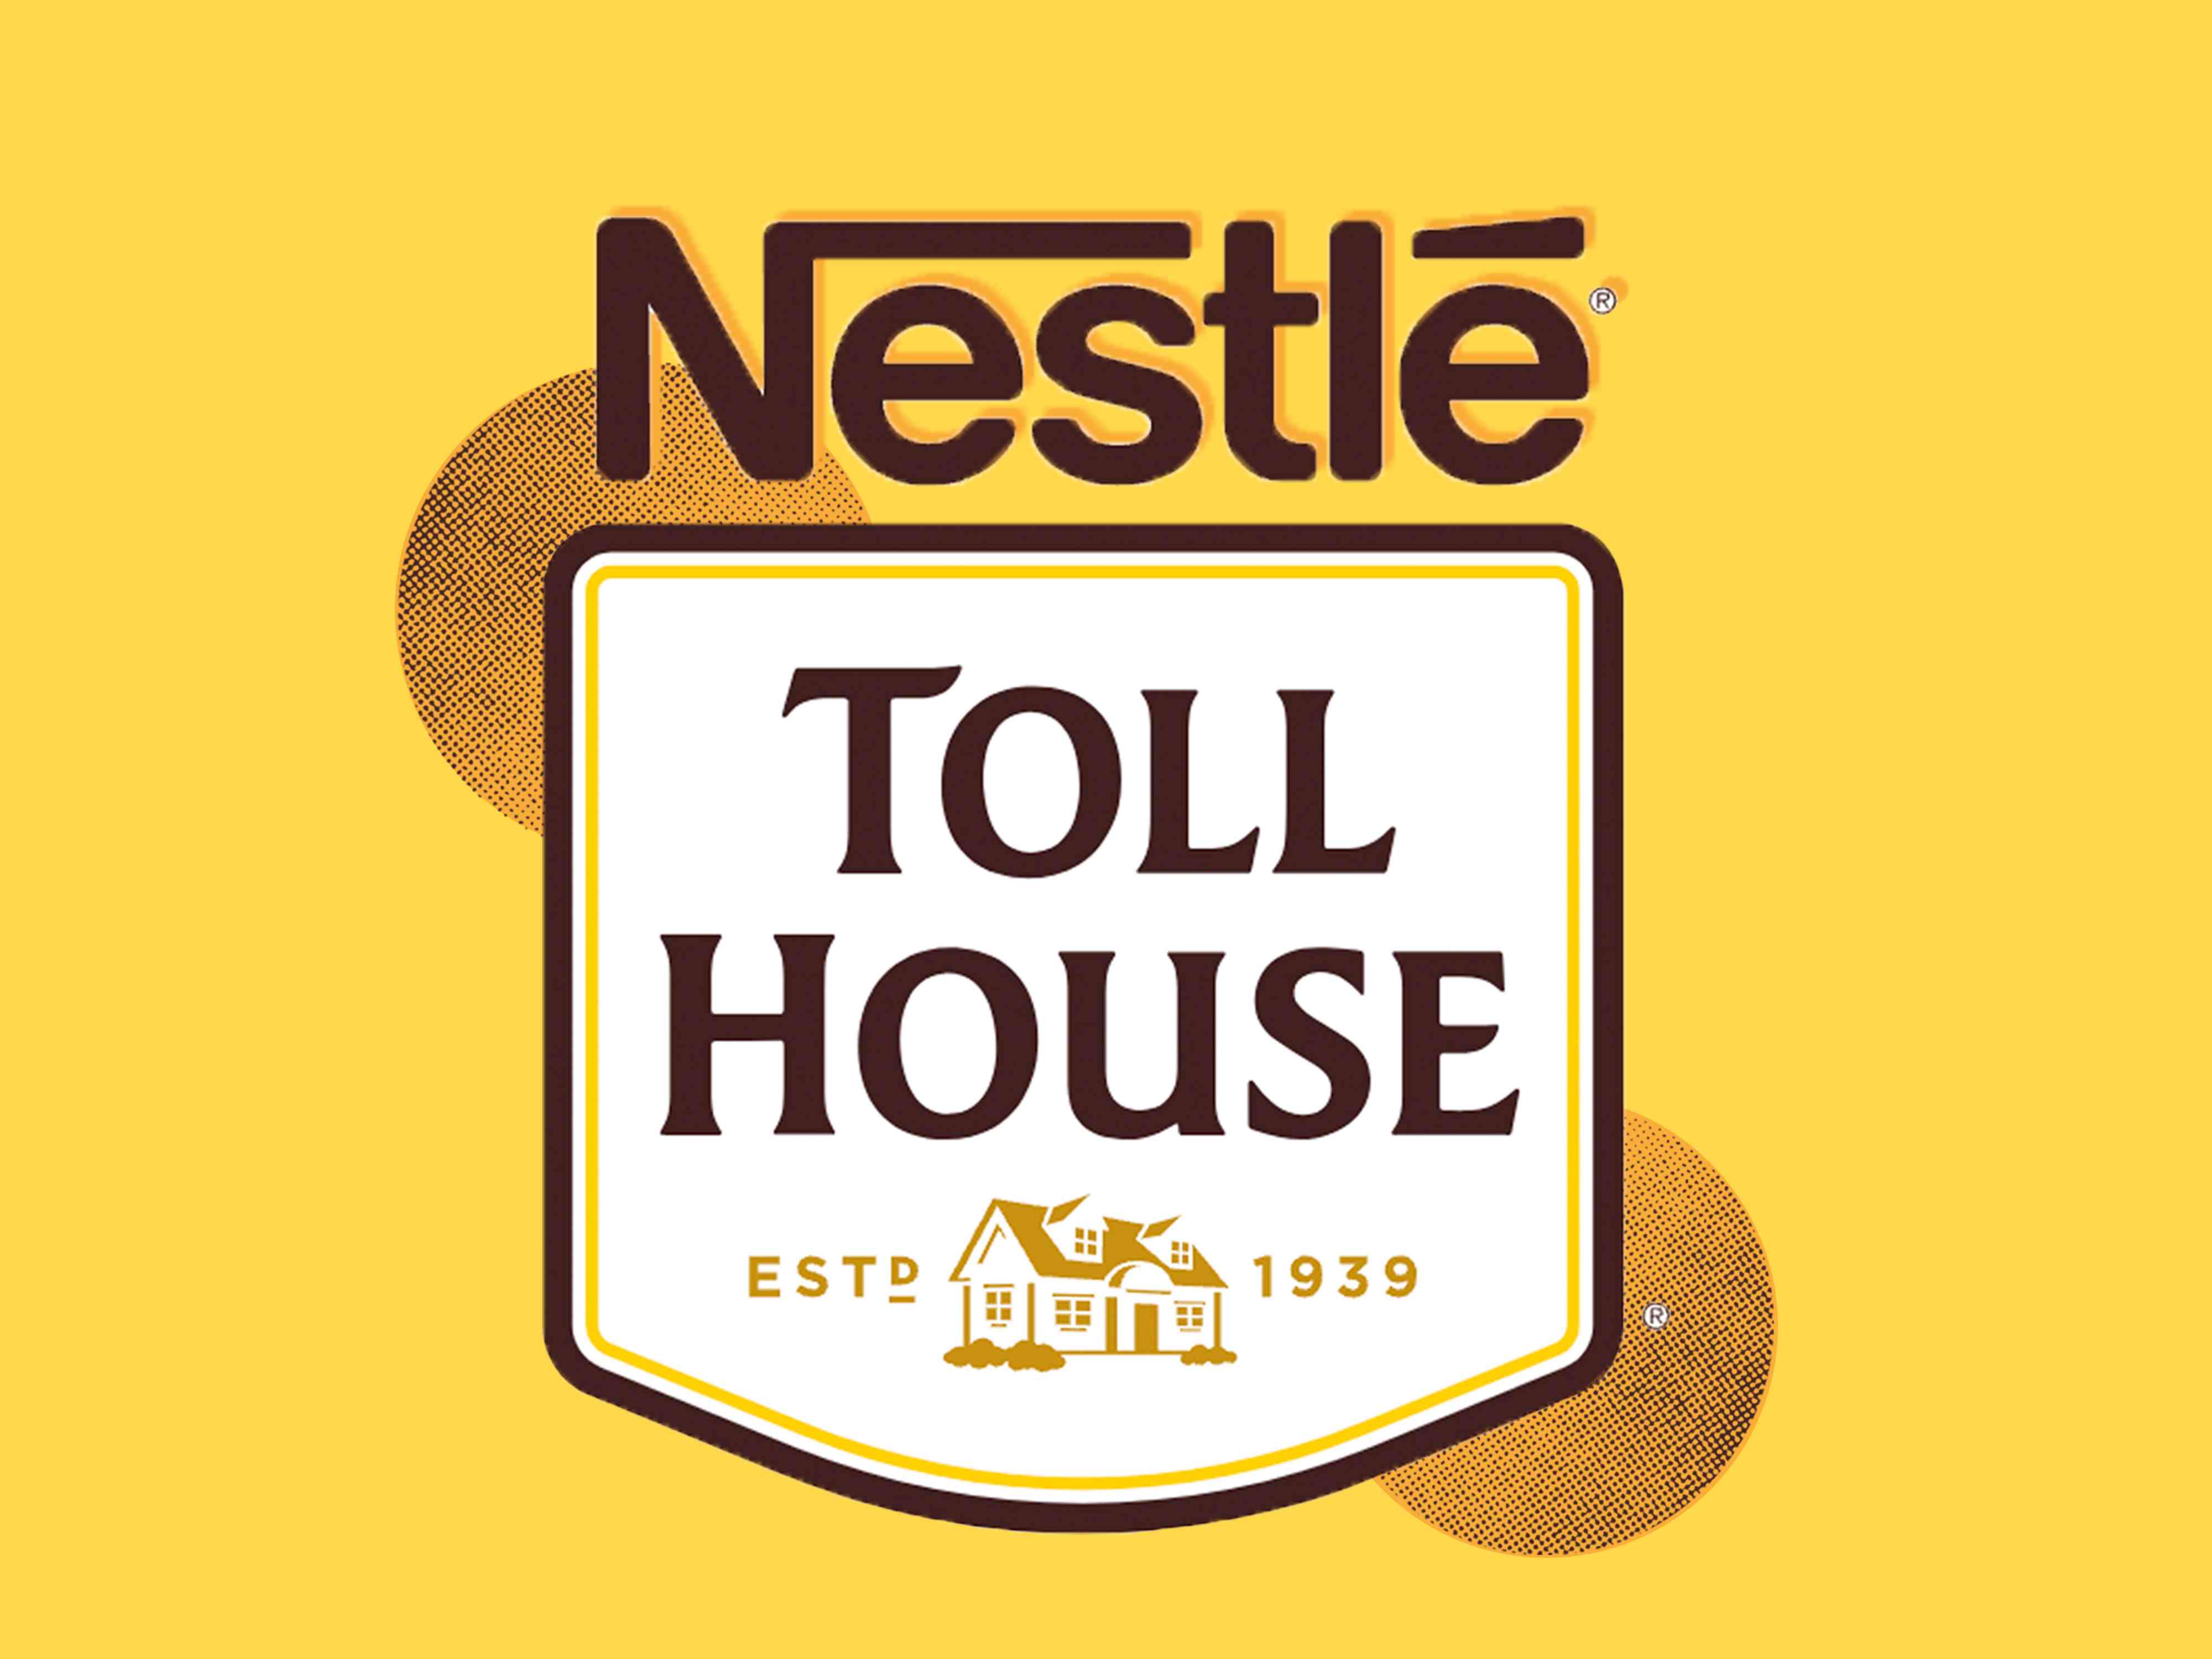 Nestlé Toll House Just Released Its Most Crowd-Pleasing Treat Yet